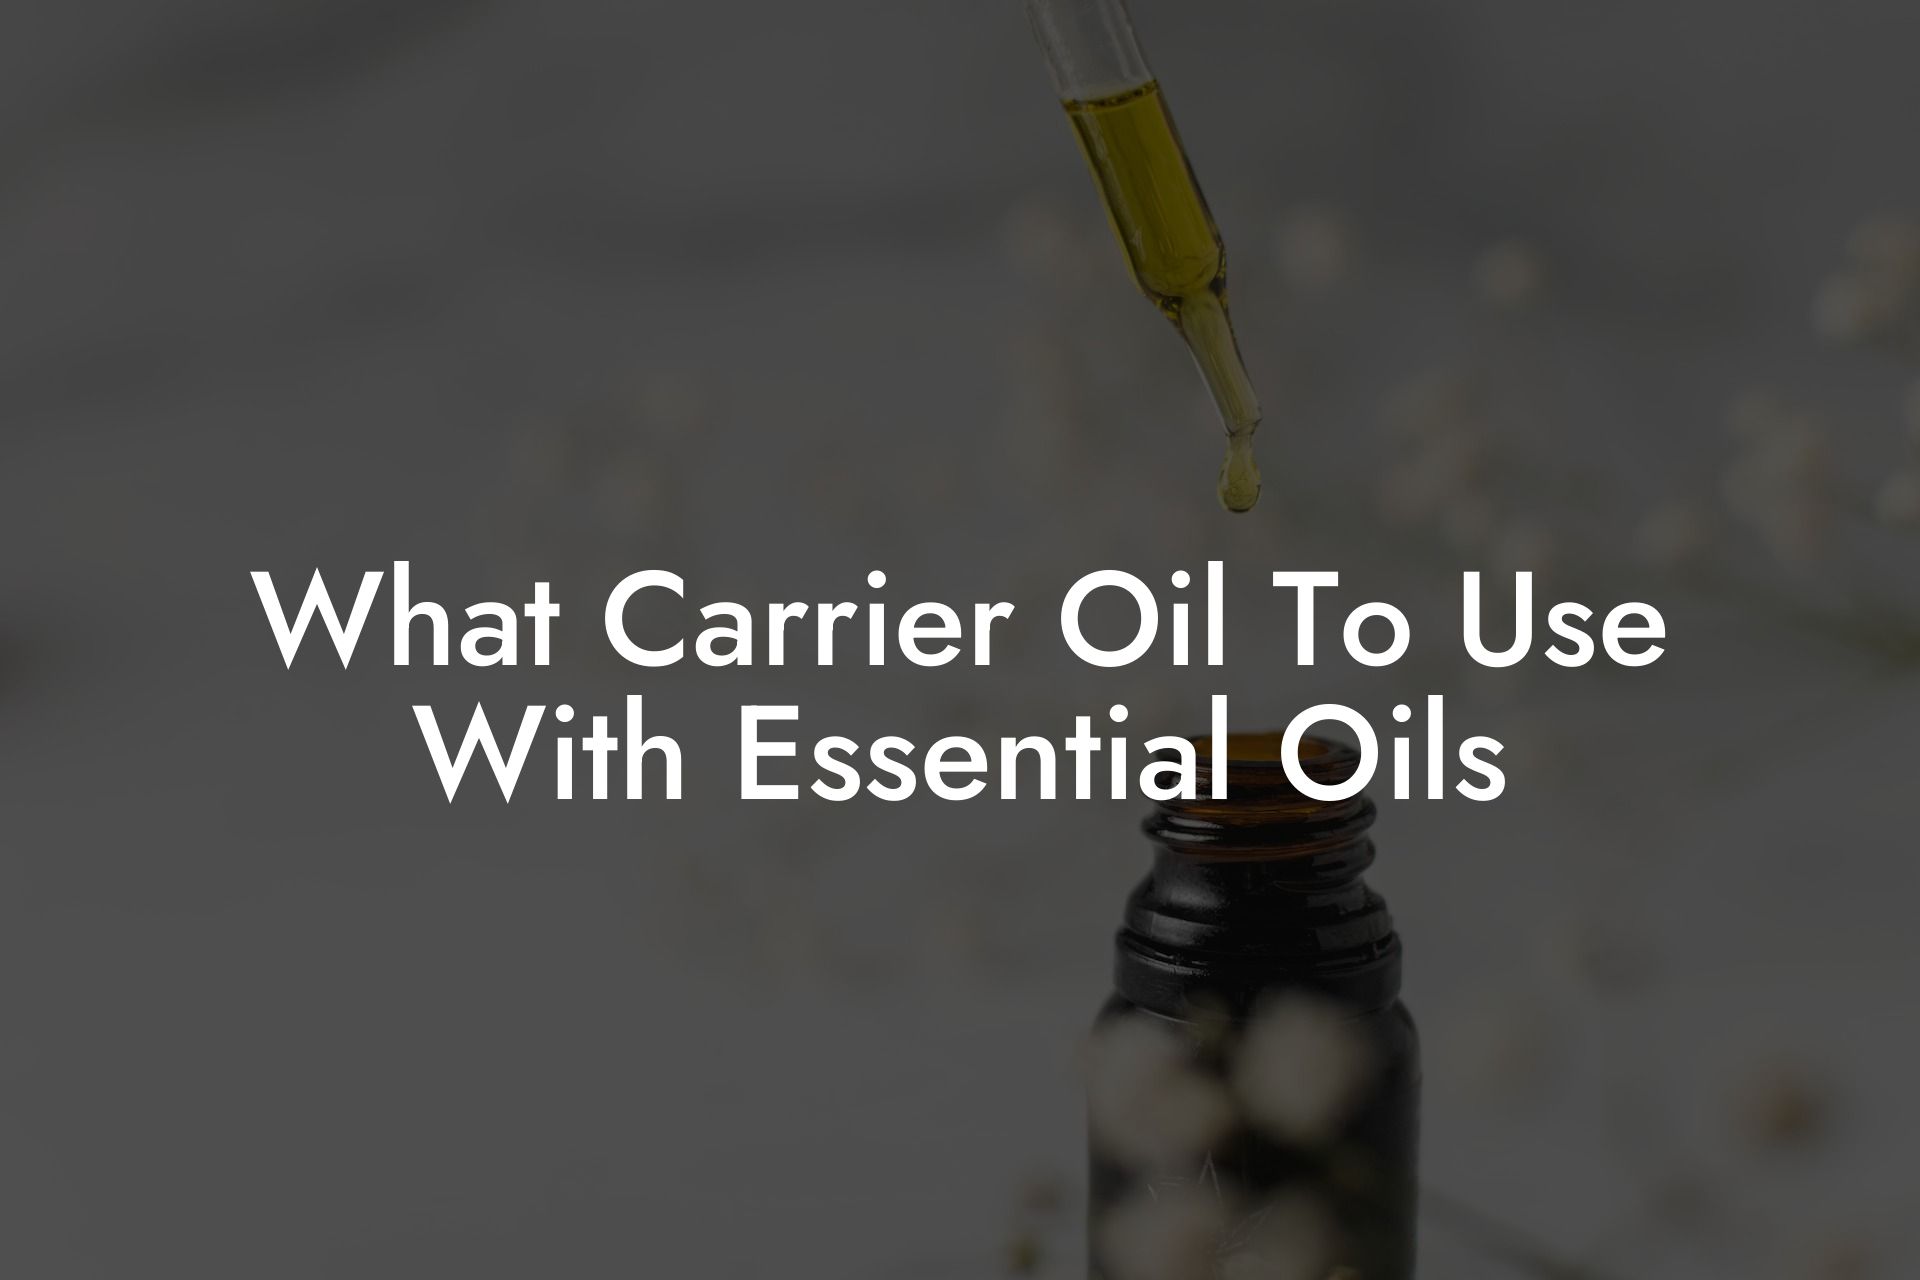 What Carrier Oil To Use With Essential Oils